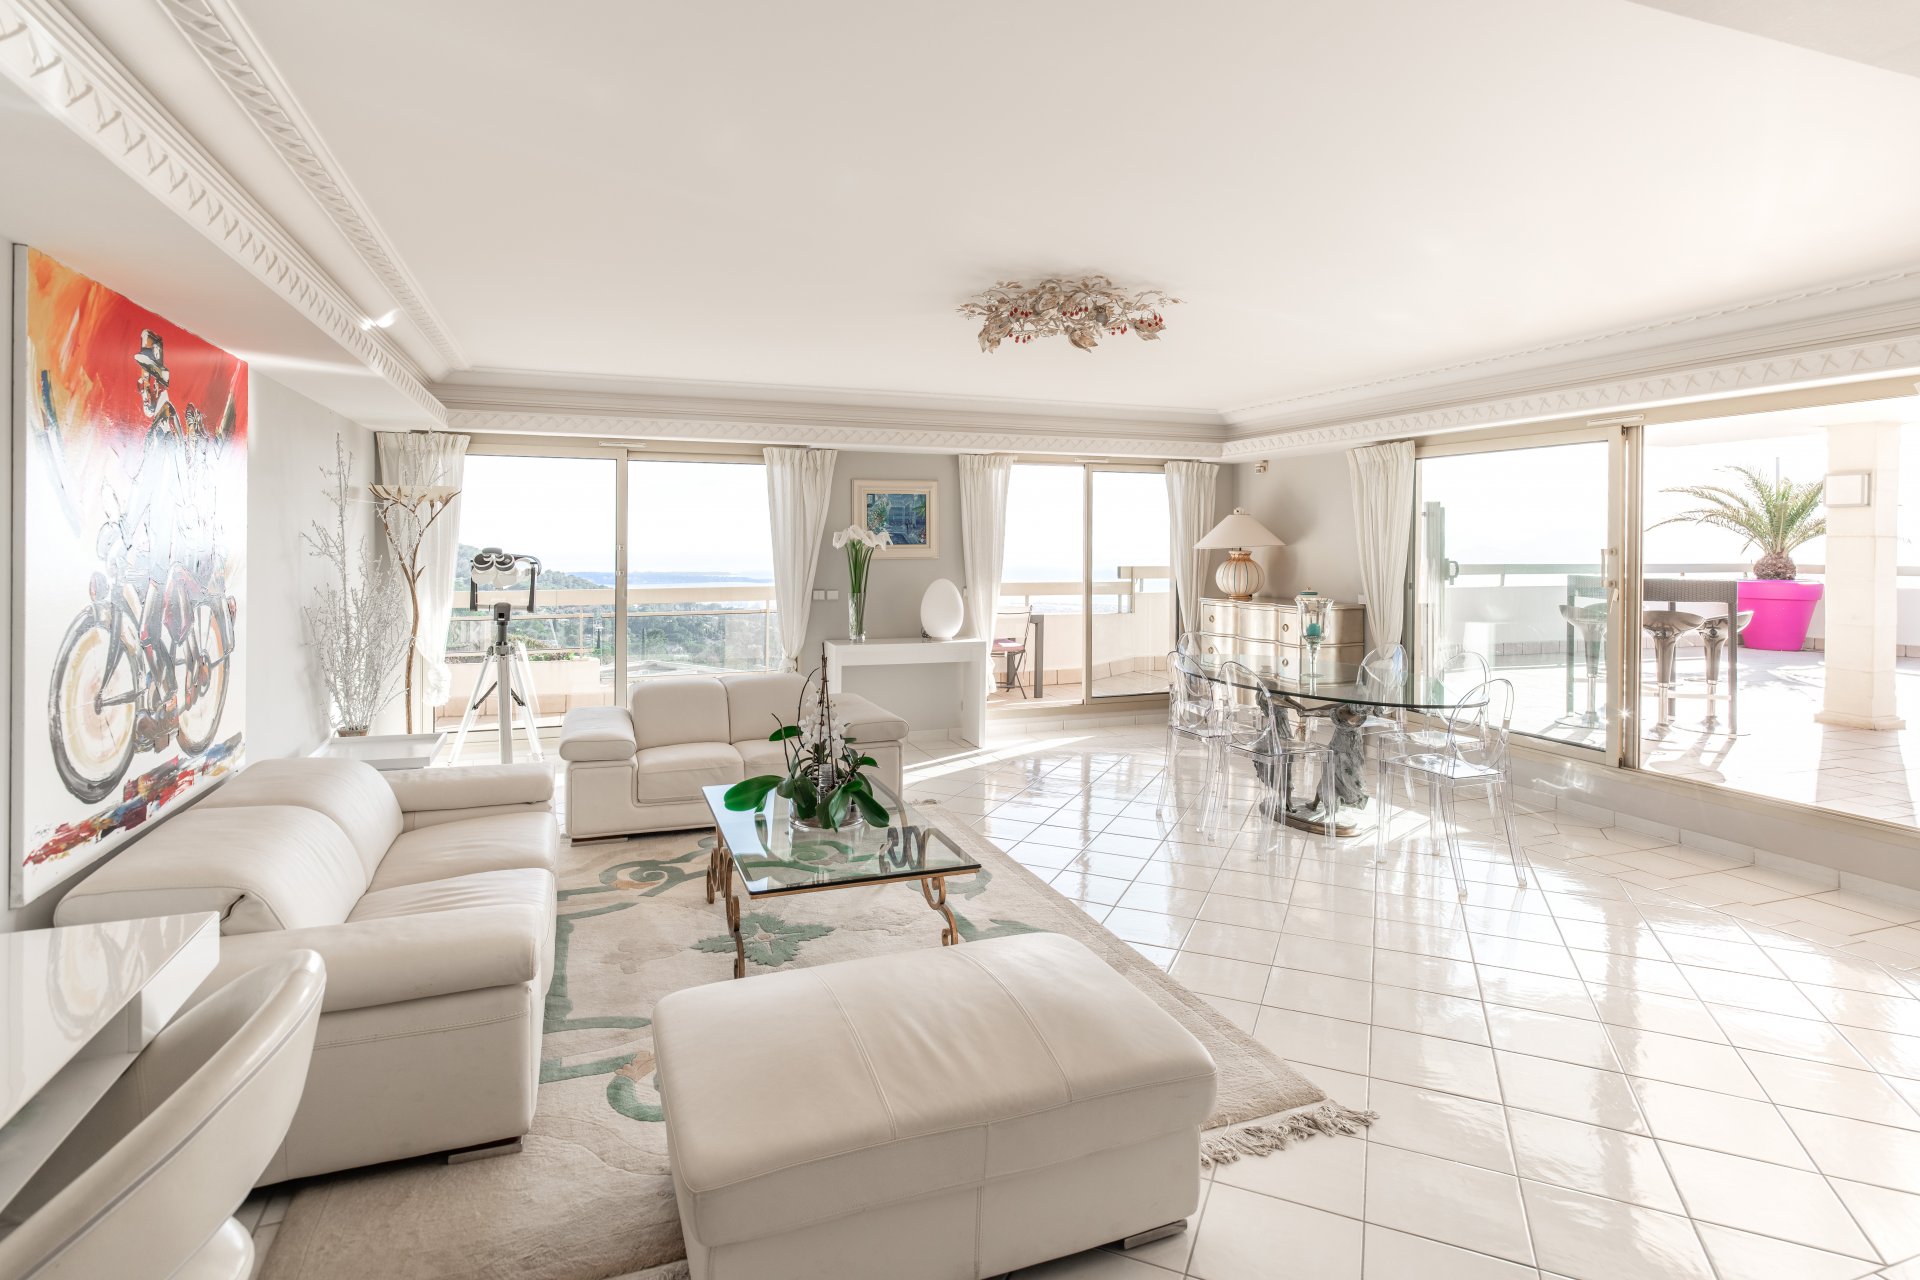 2 Bedroom Apartment For Sale in Cannes